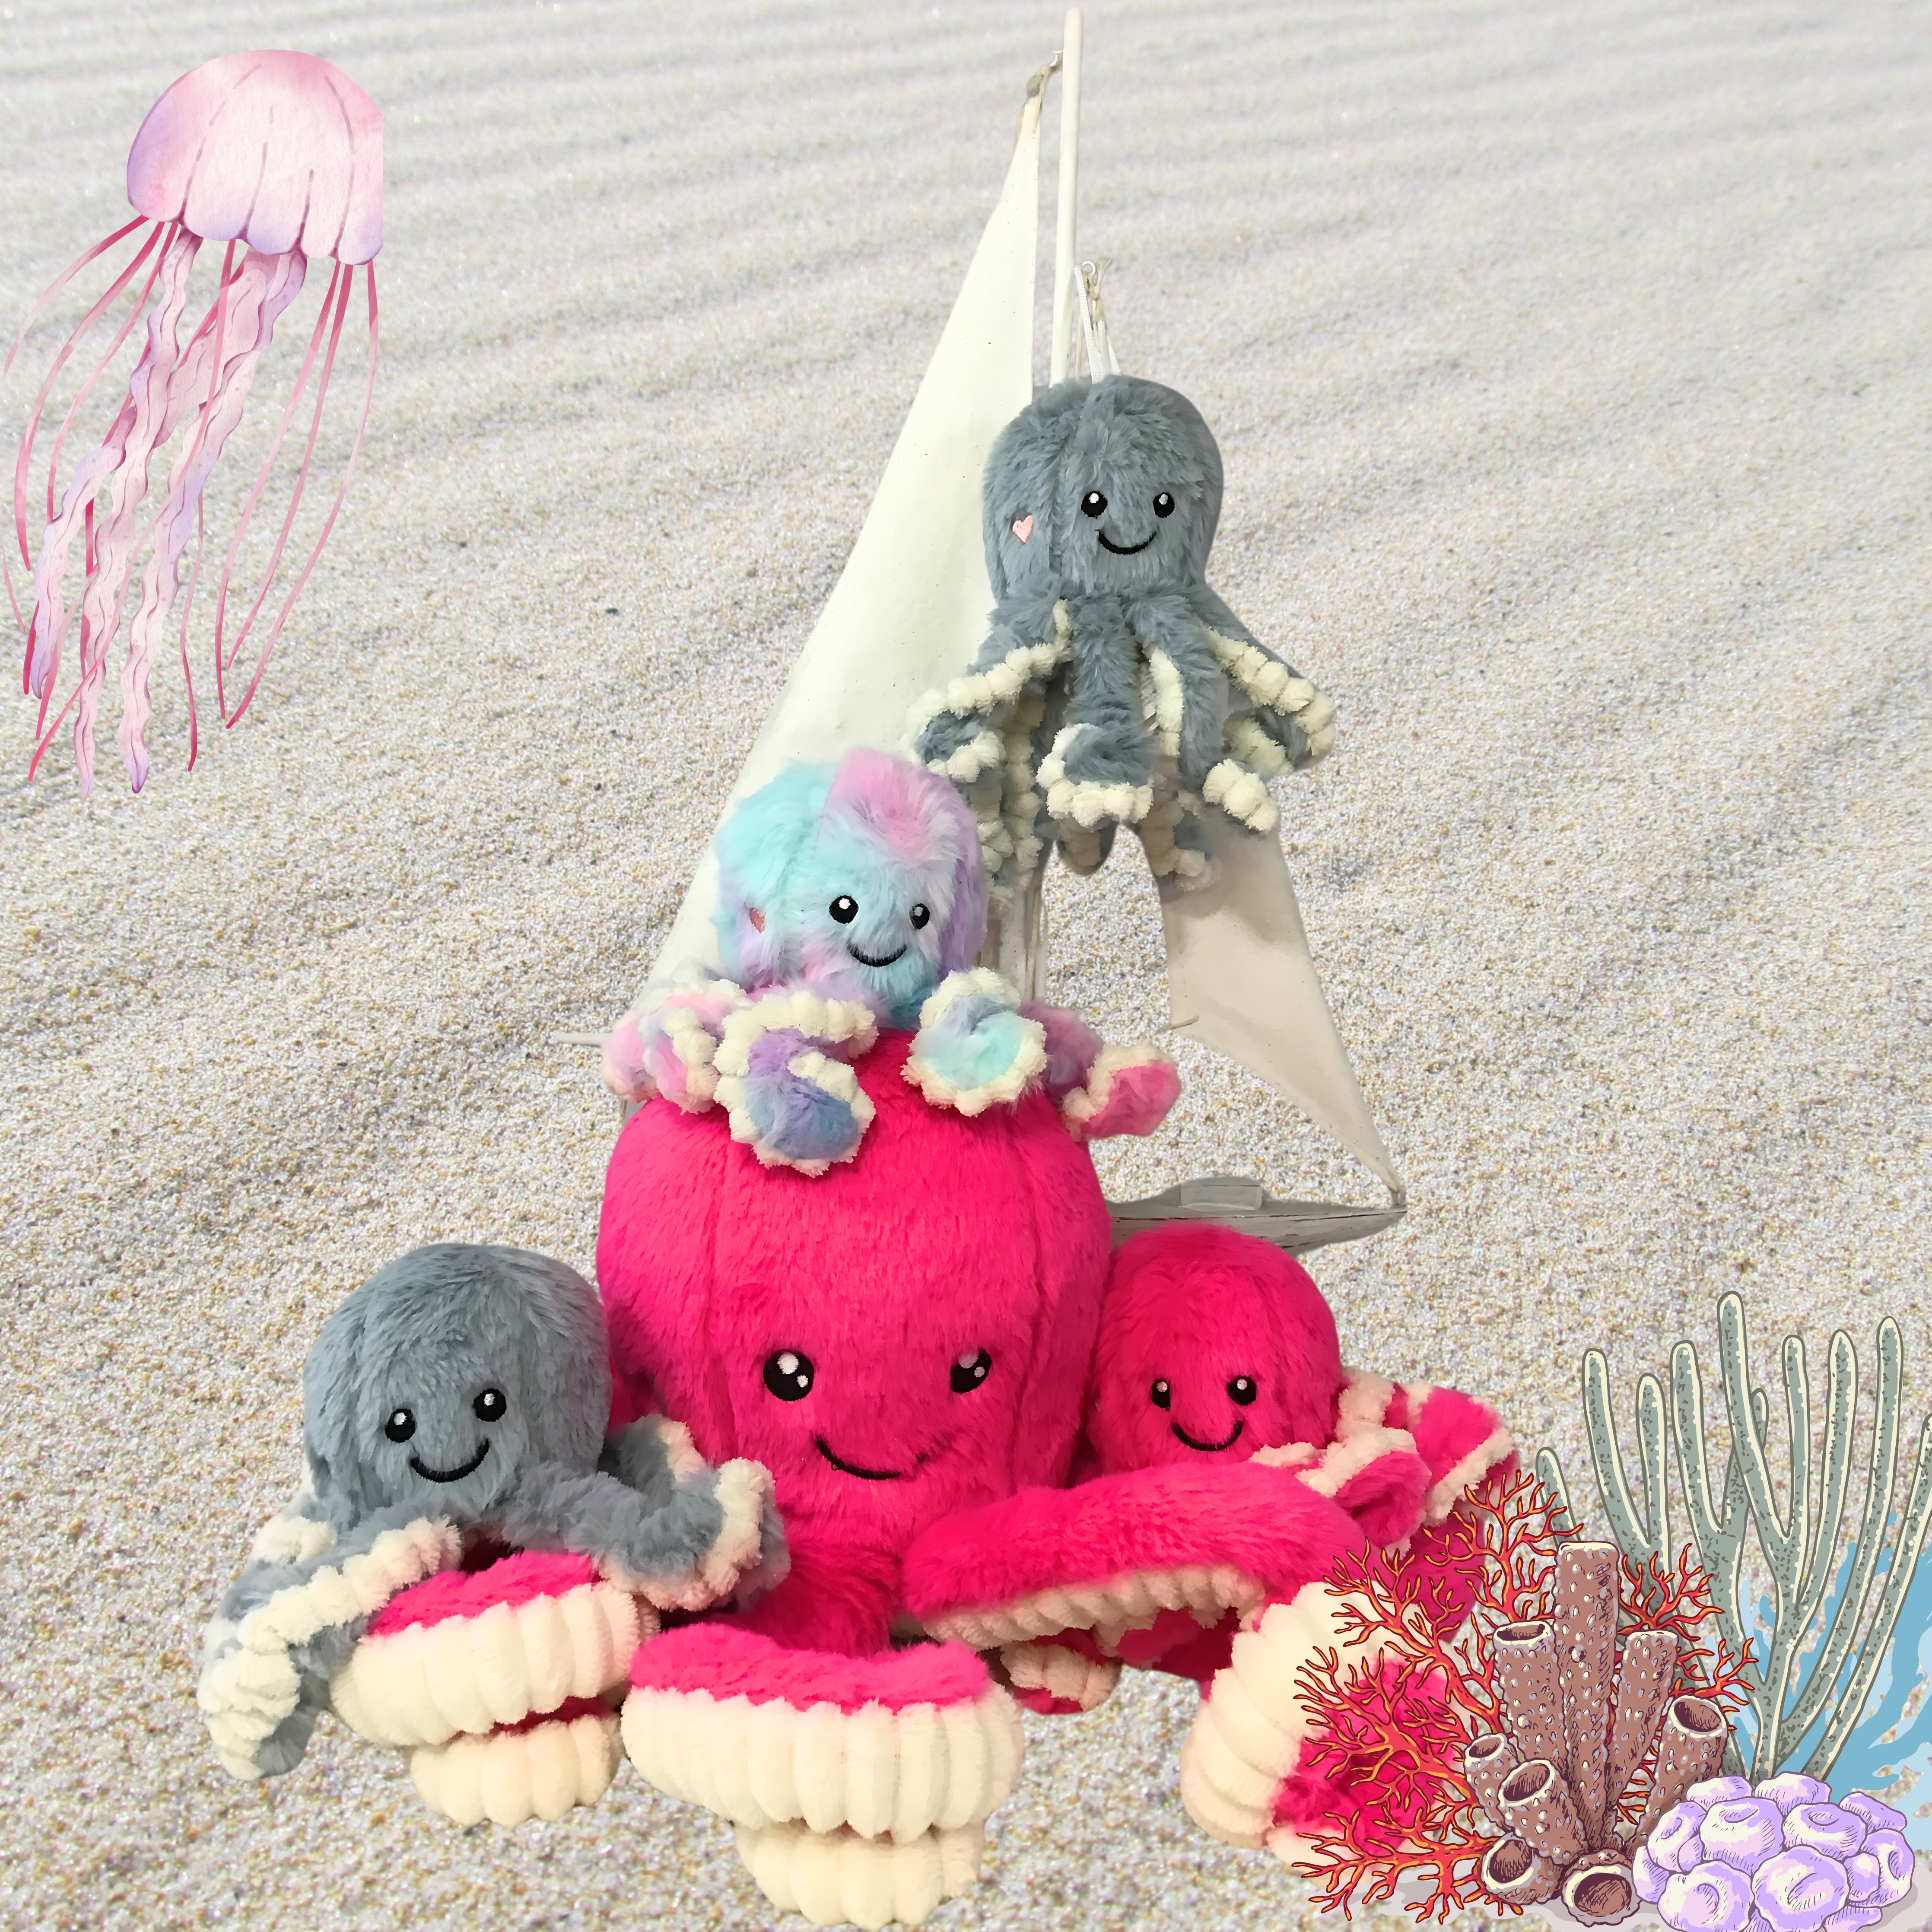 "Coming Soon" Our adorable mini octopus "Inky" comes in a variety of colors and personalities.